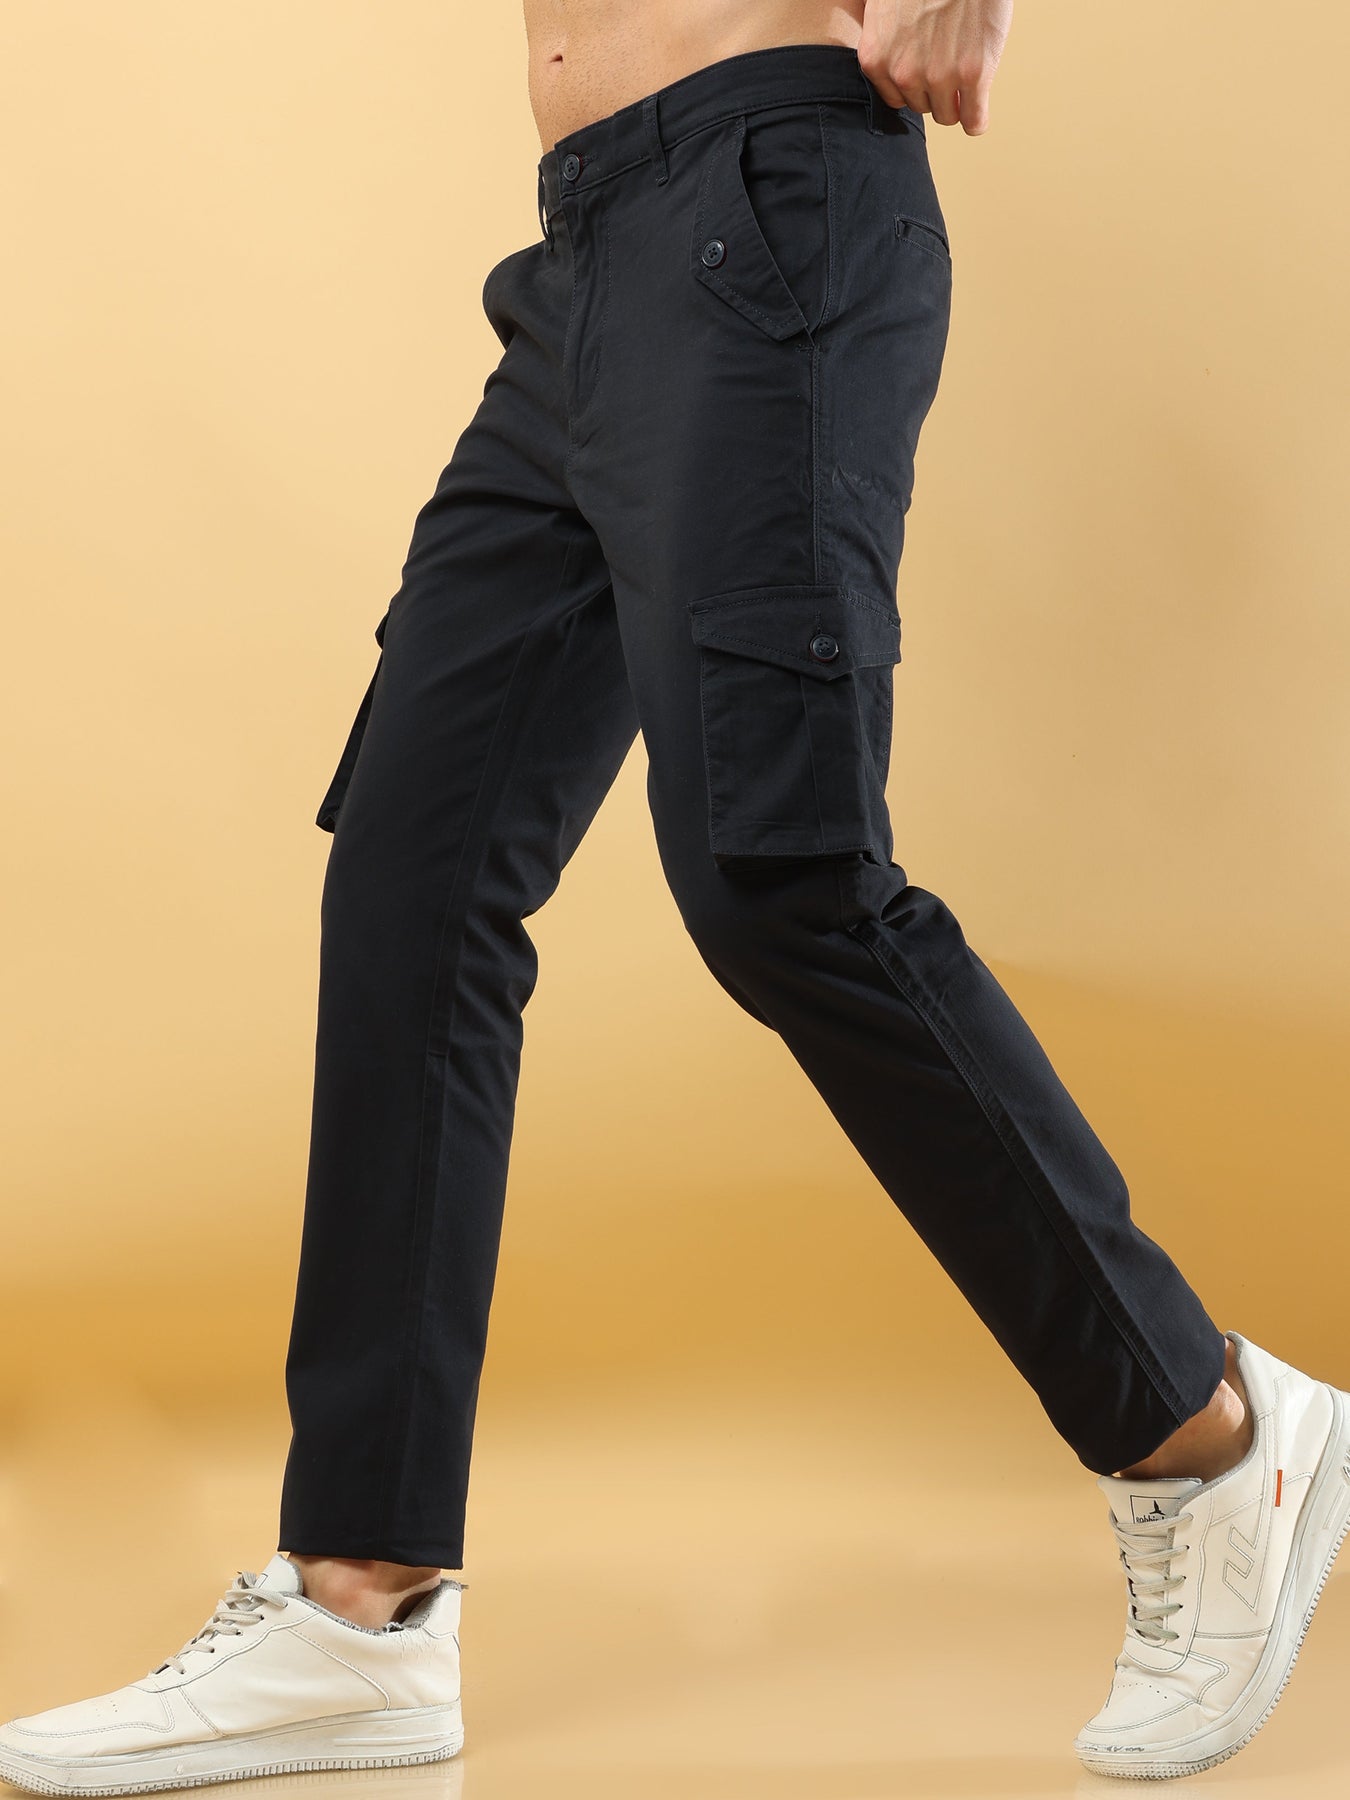 Buy Genre Over Navy Blue Cargo Pants Outfit  Address Apparels